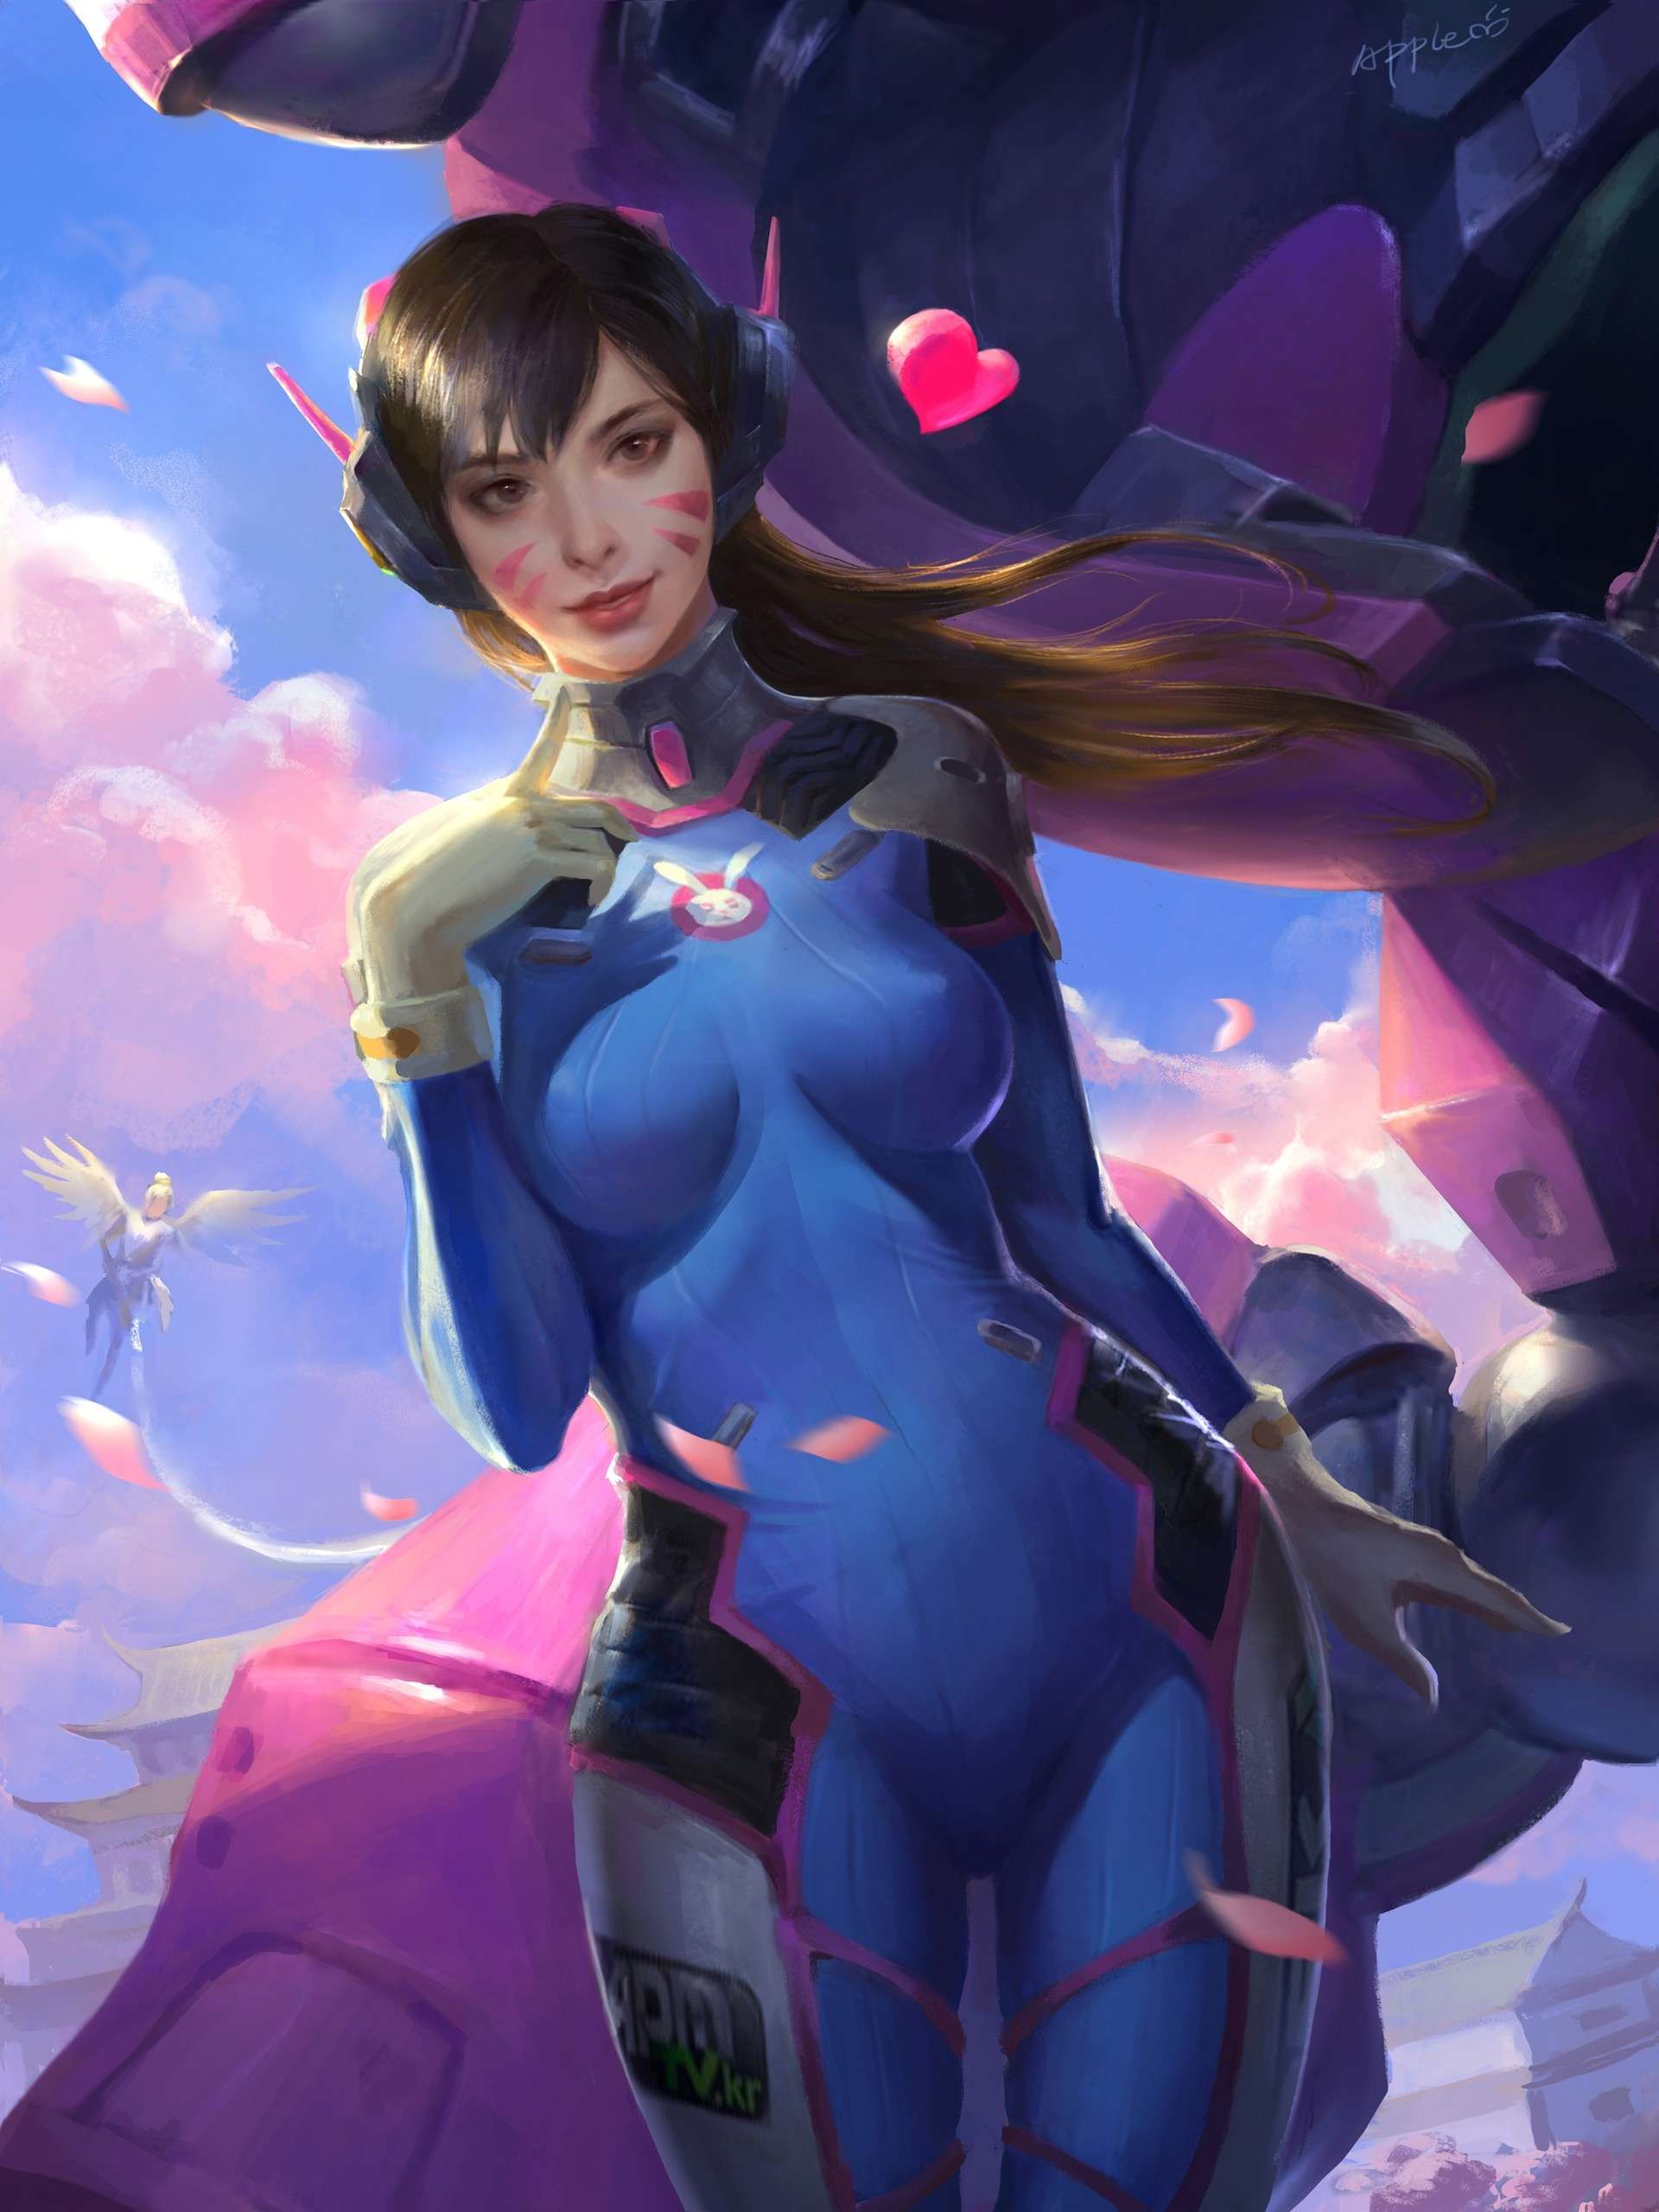 75+ Hot Pictures Of D.Va From Overwatch | Best Of Comic Books